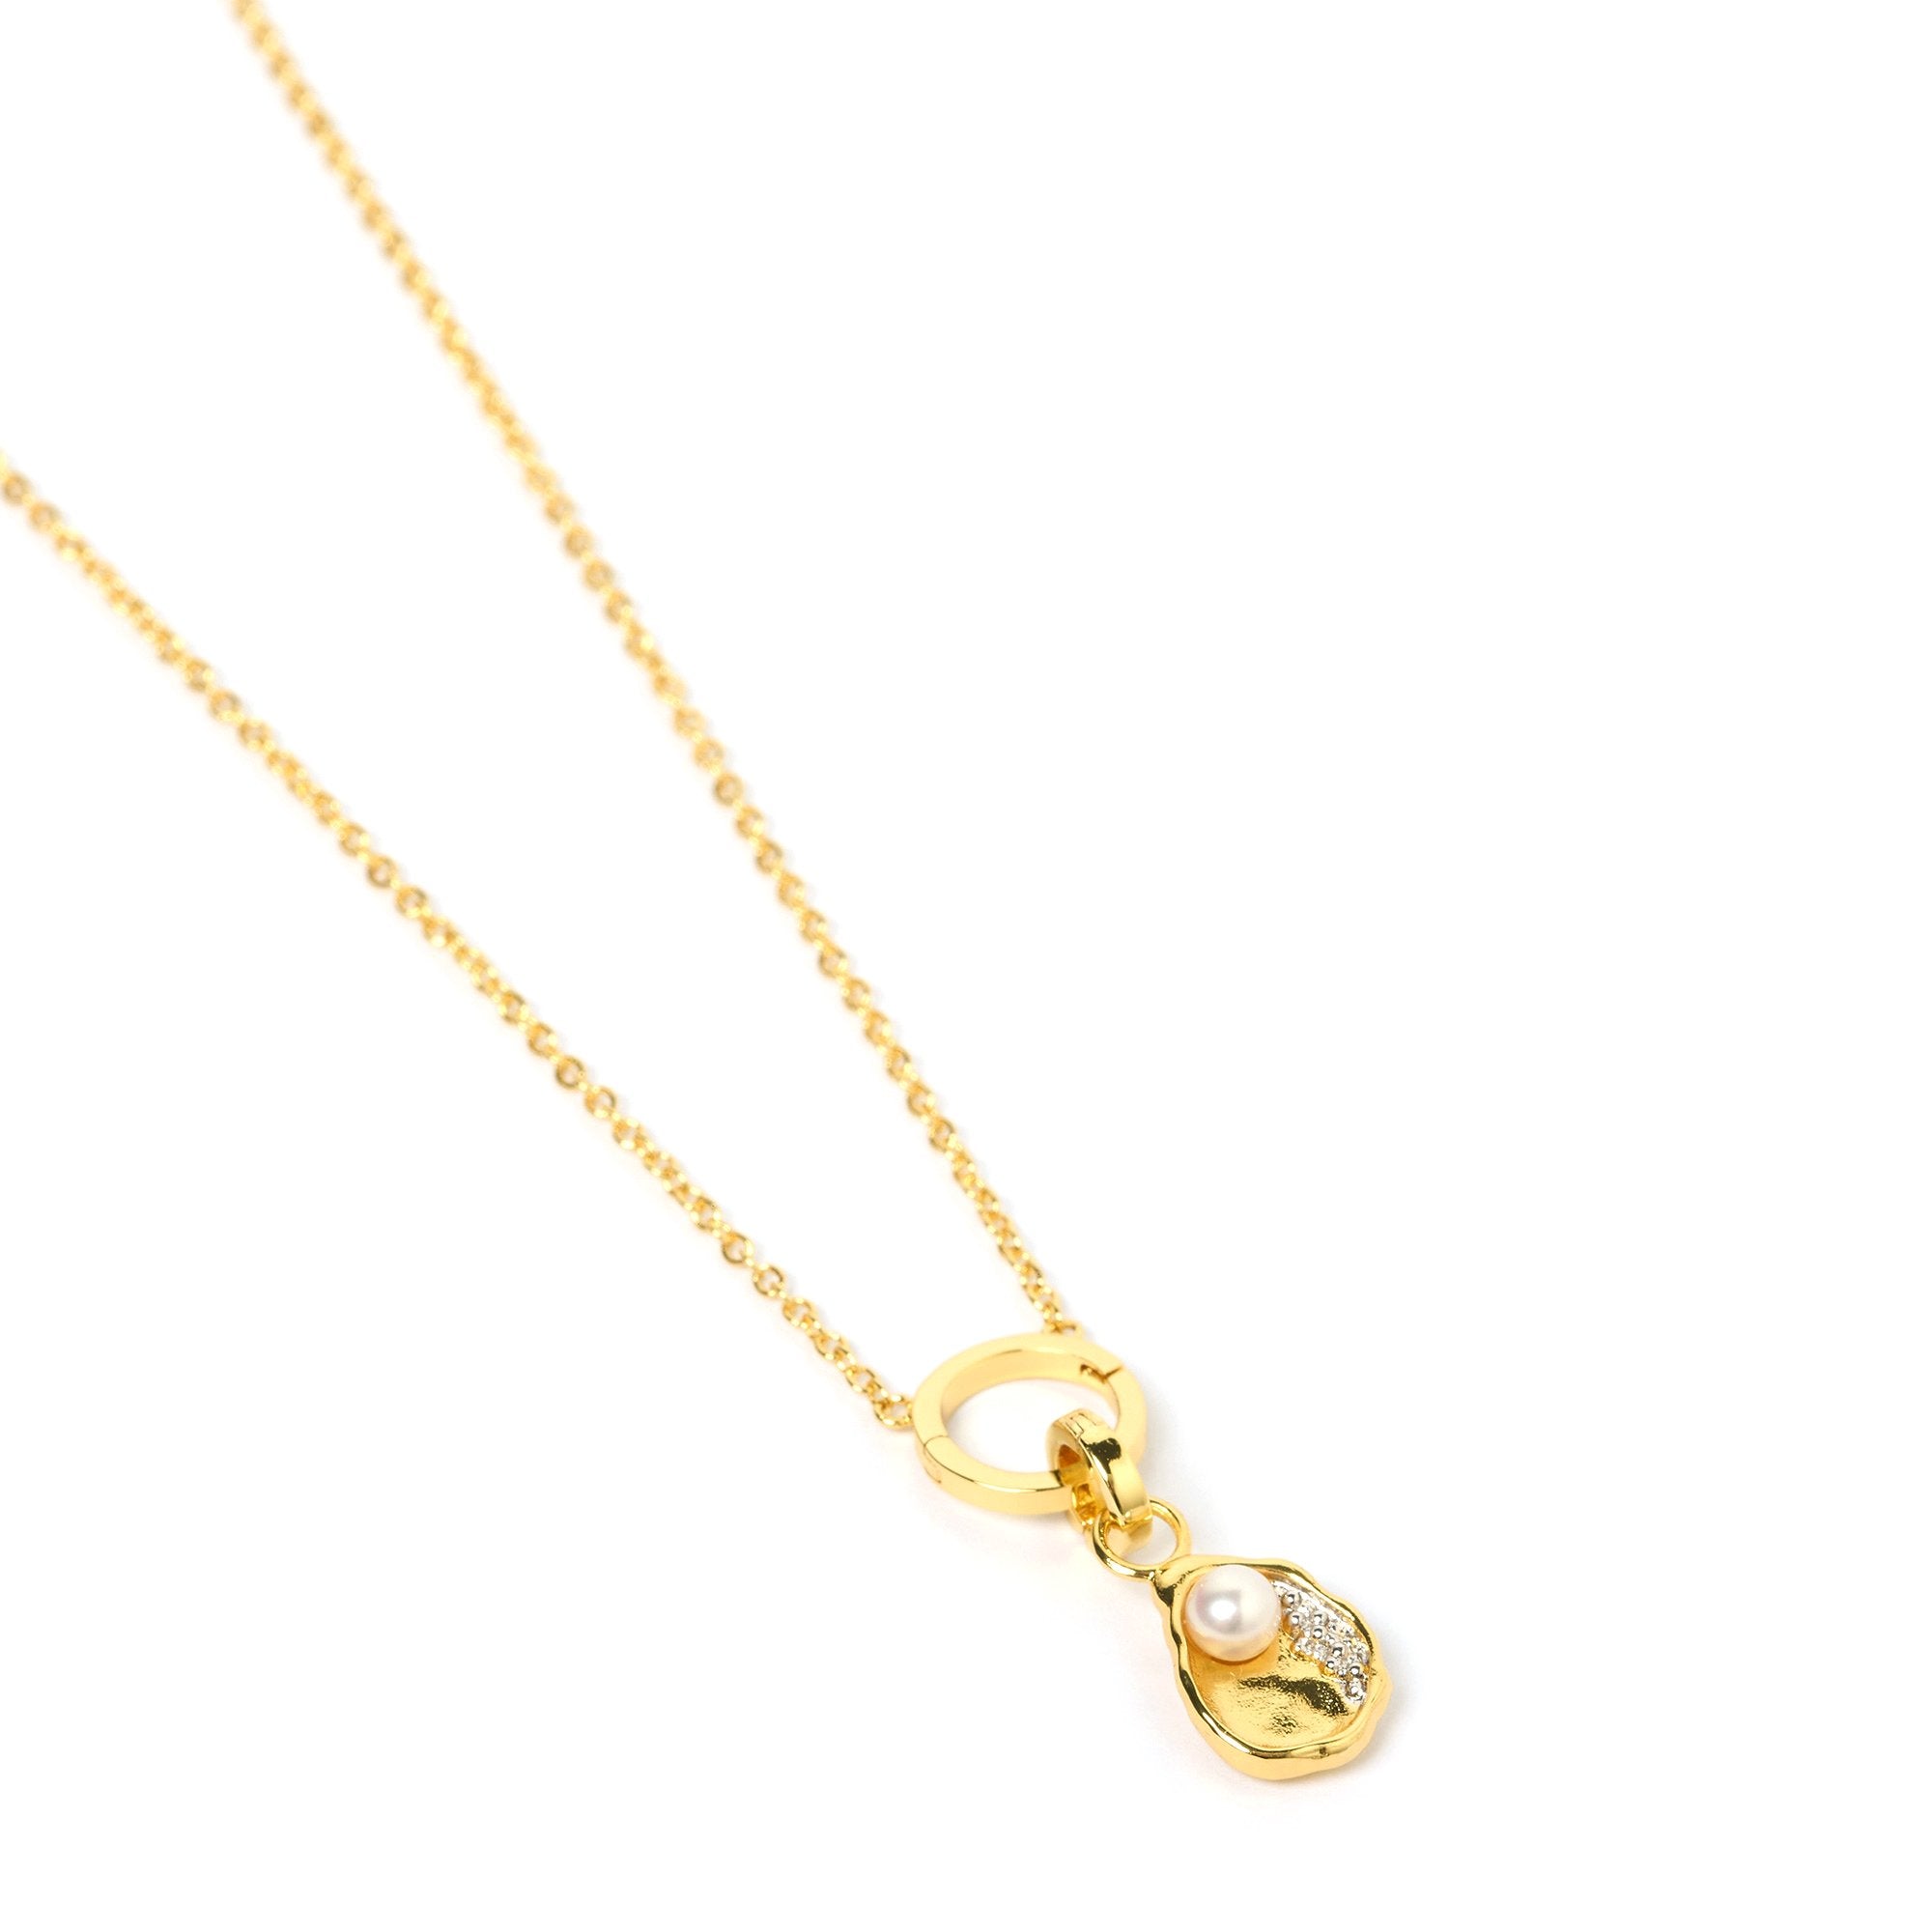 Arms Of Eve stunning Ursula 'O' charm gold necklace adorned with lustrous pearl and sparkling diamond pendant